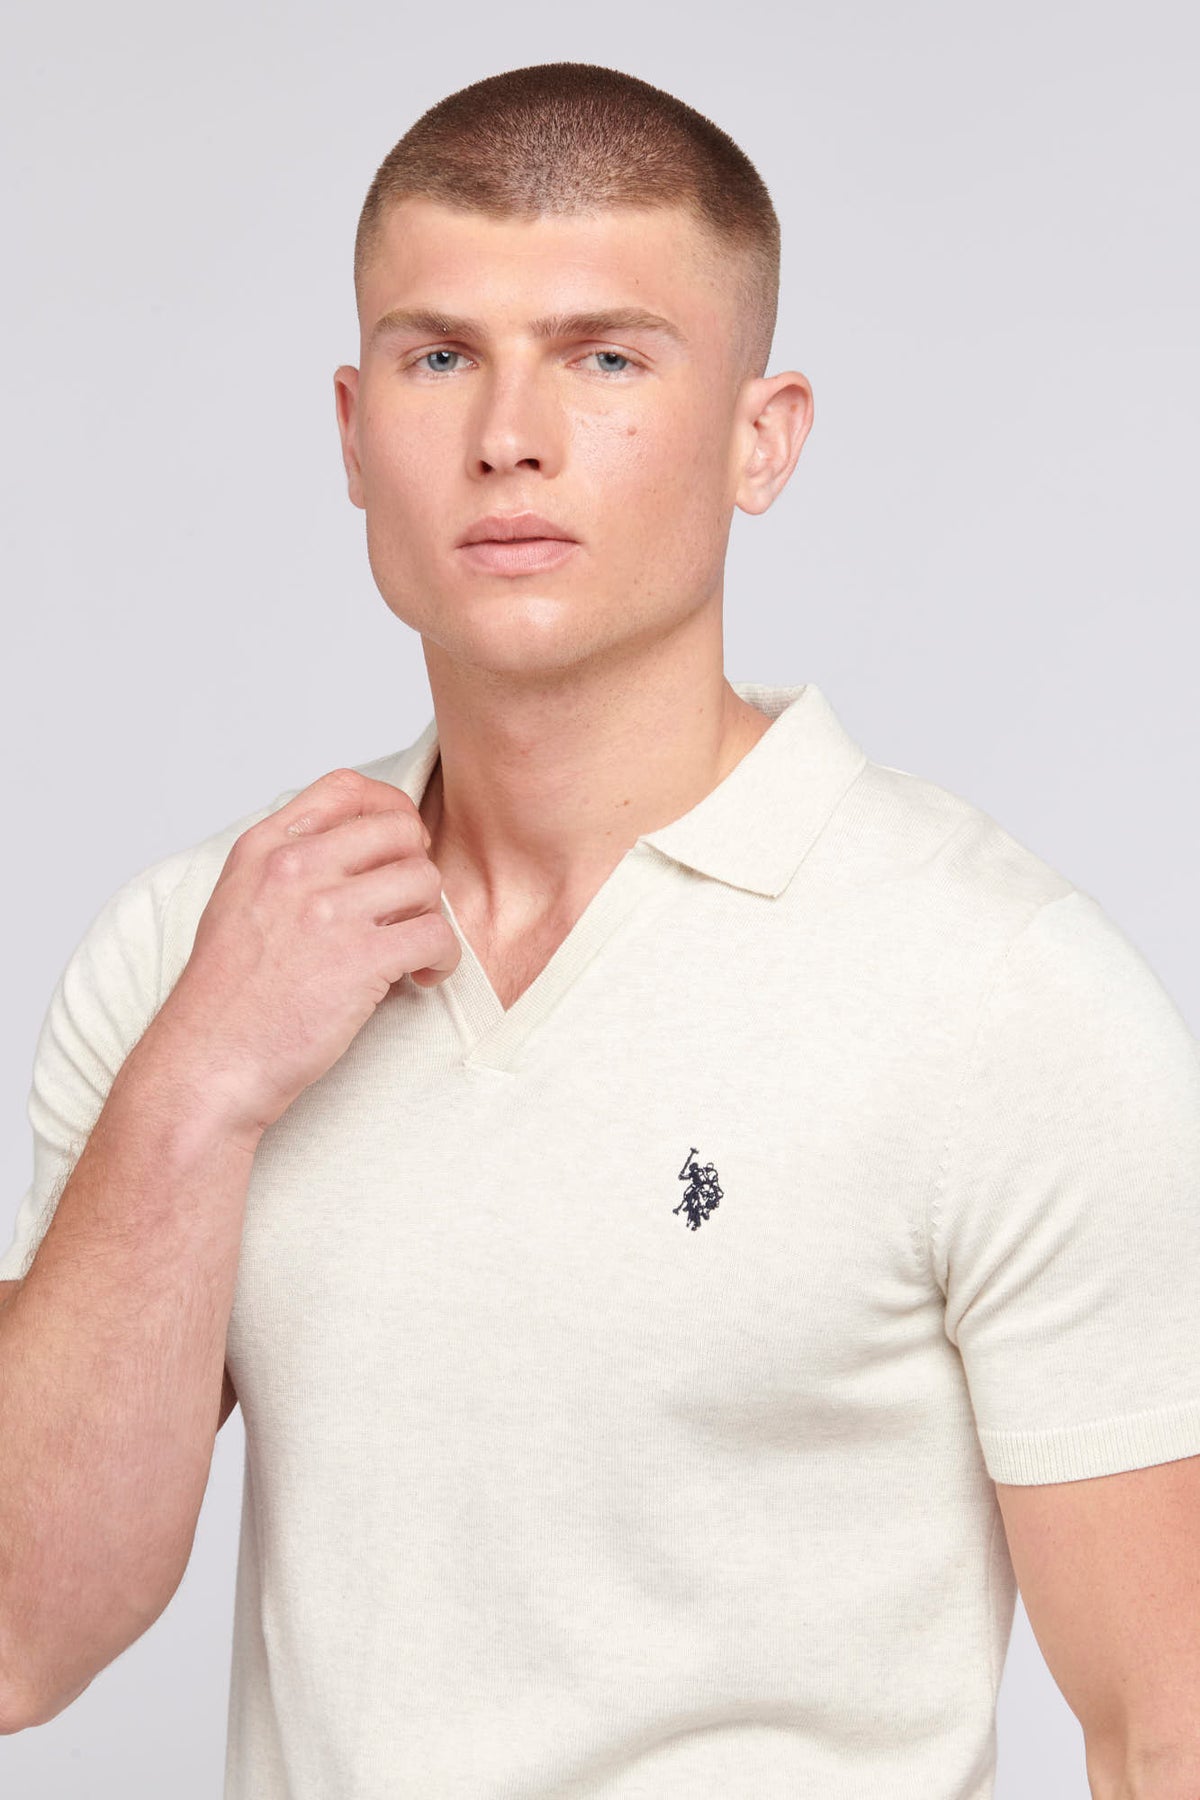 Mens Regular Fit Combed Cotton Polo Shirt in Birch Marl